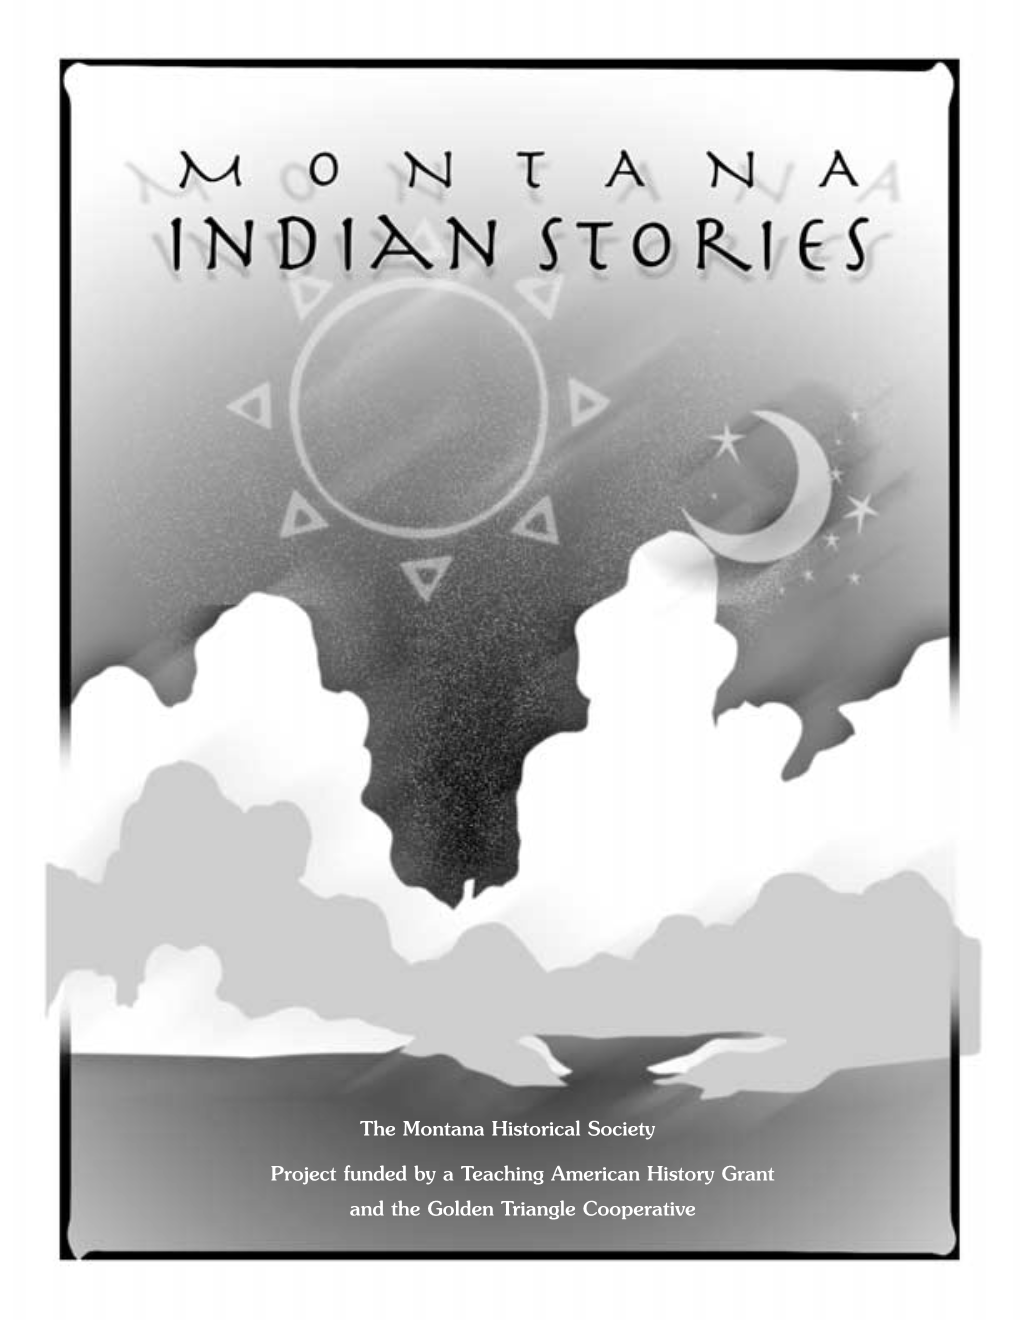 Montana Indian Stories Lit Kit—Offers a Taste of Montana Indian Storytelling Legacy with Class Sets of Seven Indian Reading Series Titles and Also Animal Puppets